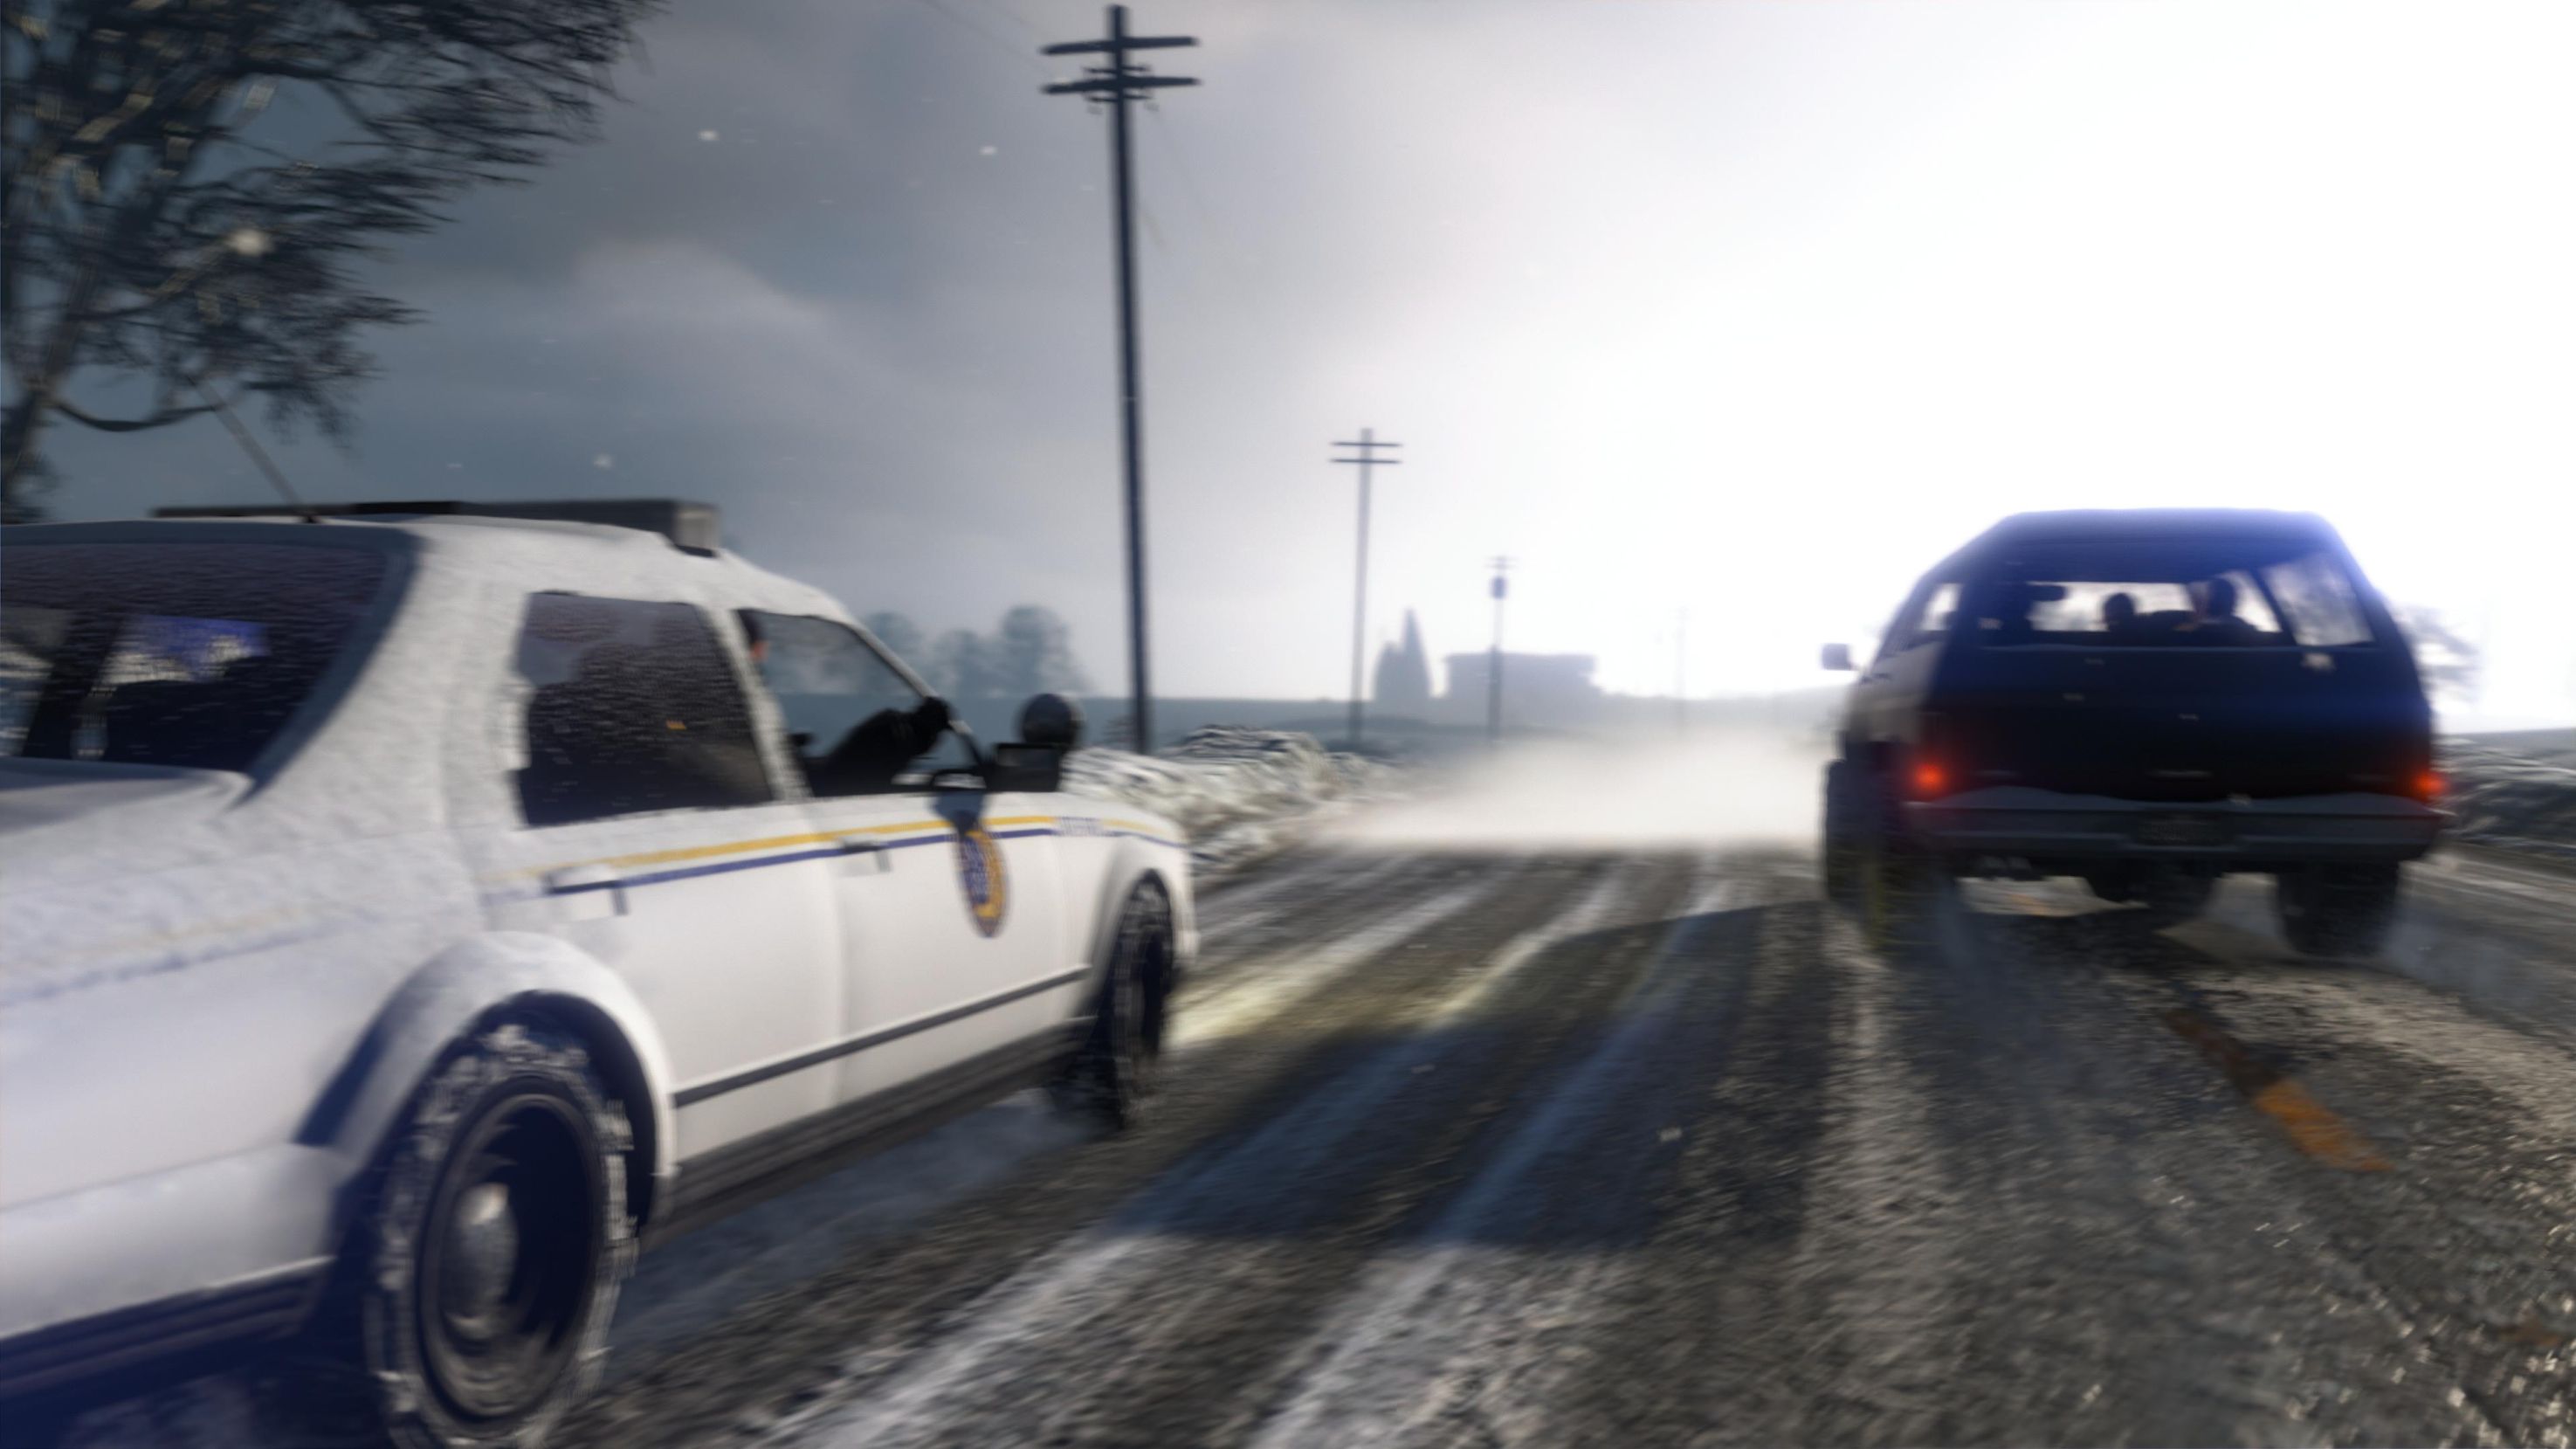 Alleged GTA 6 leaker has been formally charged by police